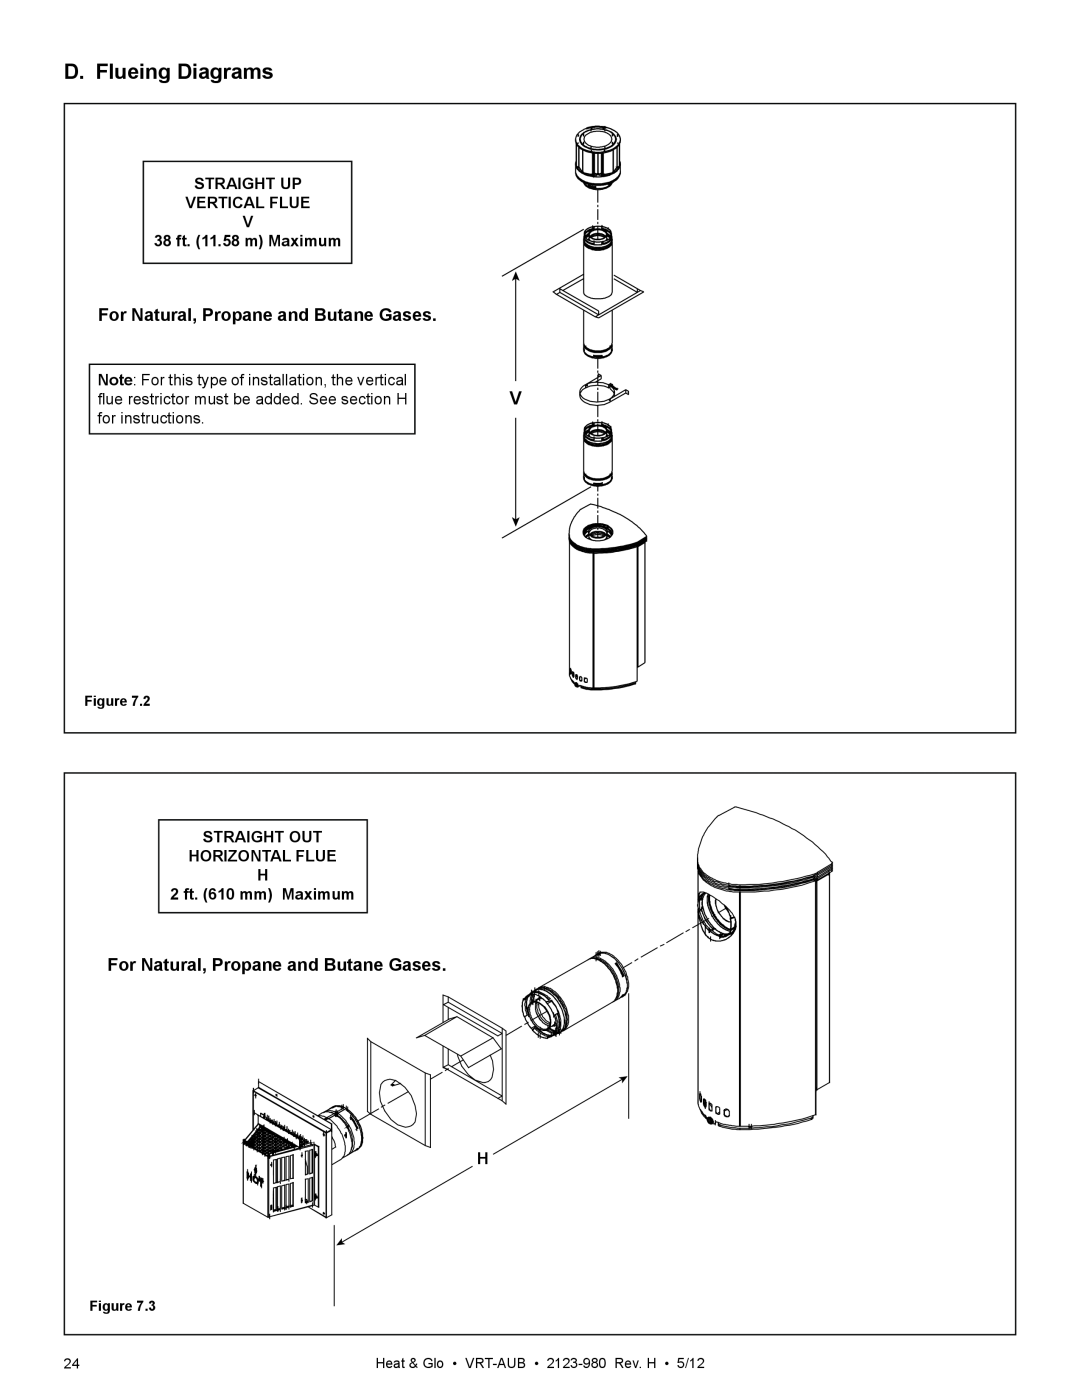 Heat & Glo LifeStyle VRT-GY-N-AUB D. Flueing Diagrams, For Natural, Propane and Butane Gases, Straight Up Vertical Flue V 